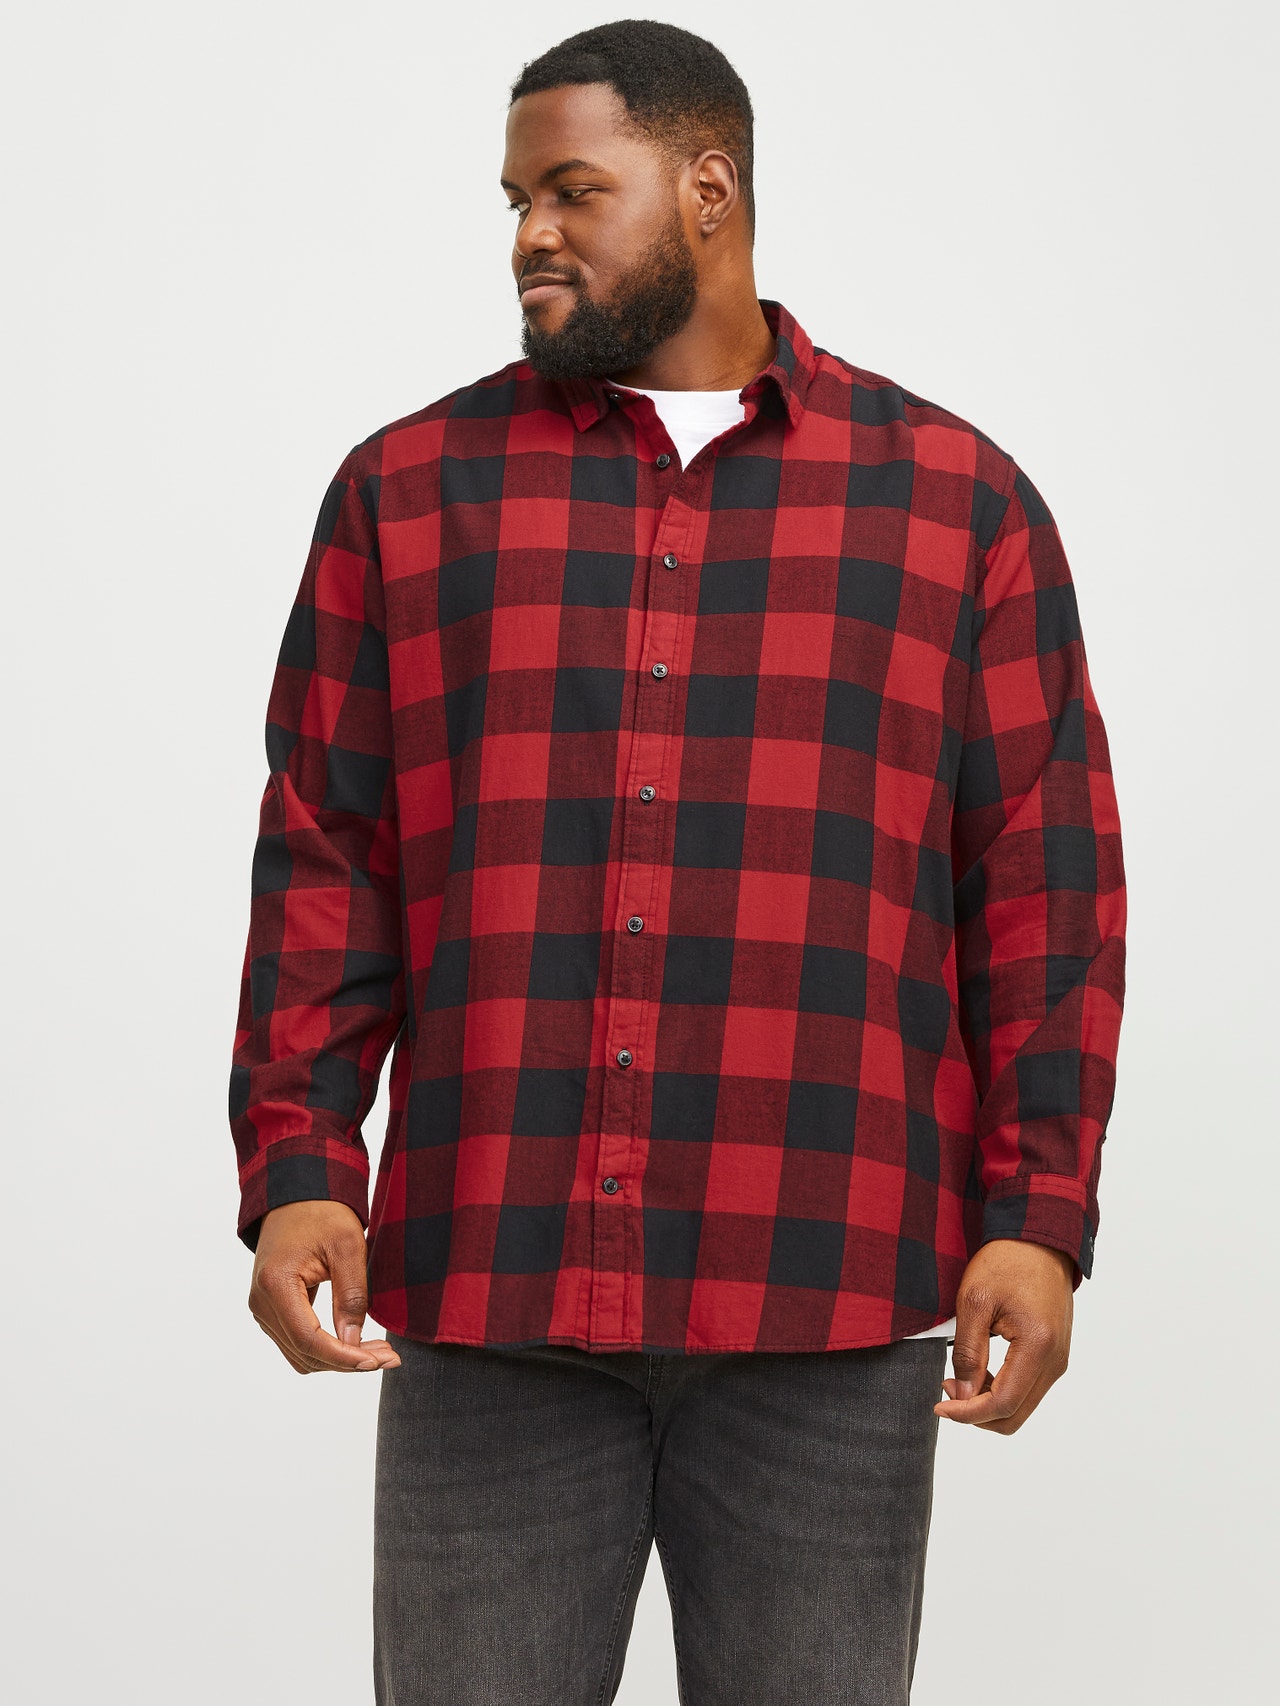 Plus Size Loose Fit Checked shirt, Dark Red